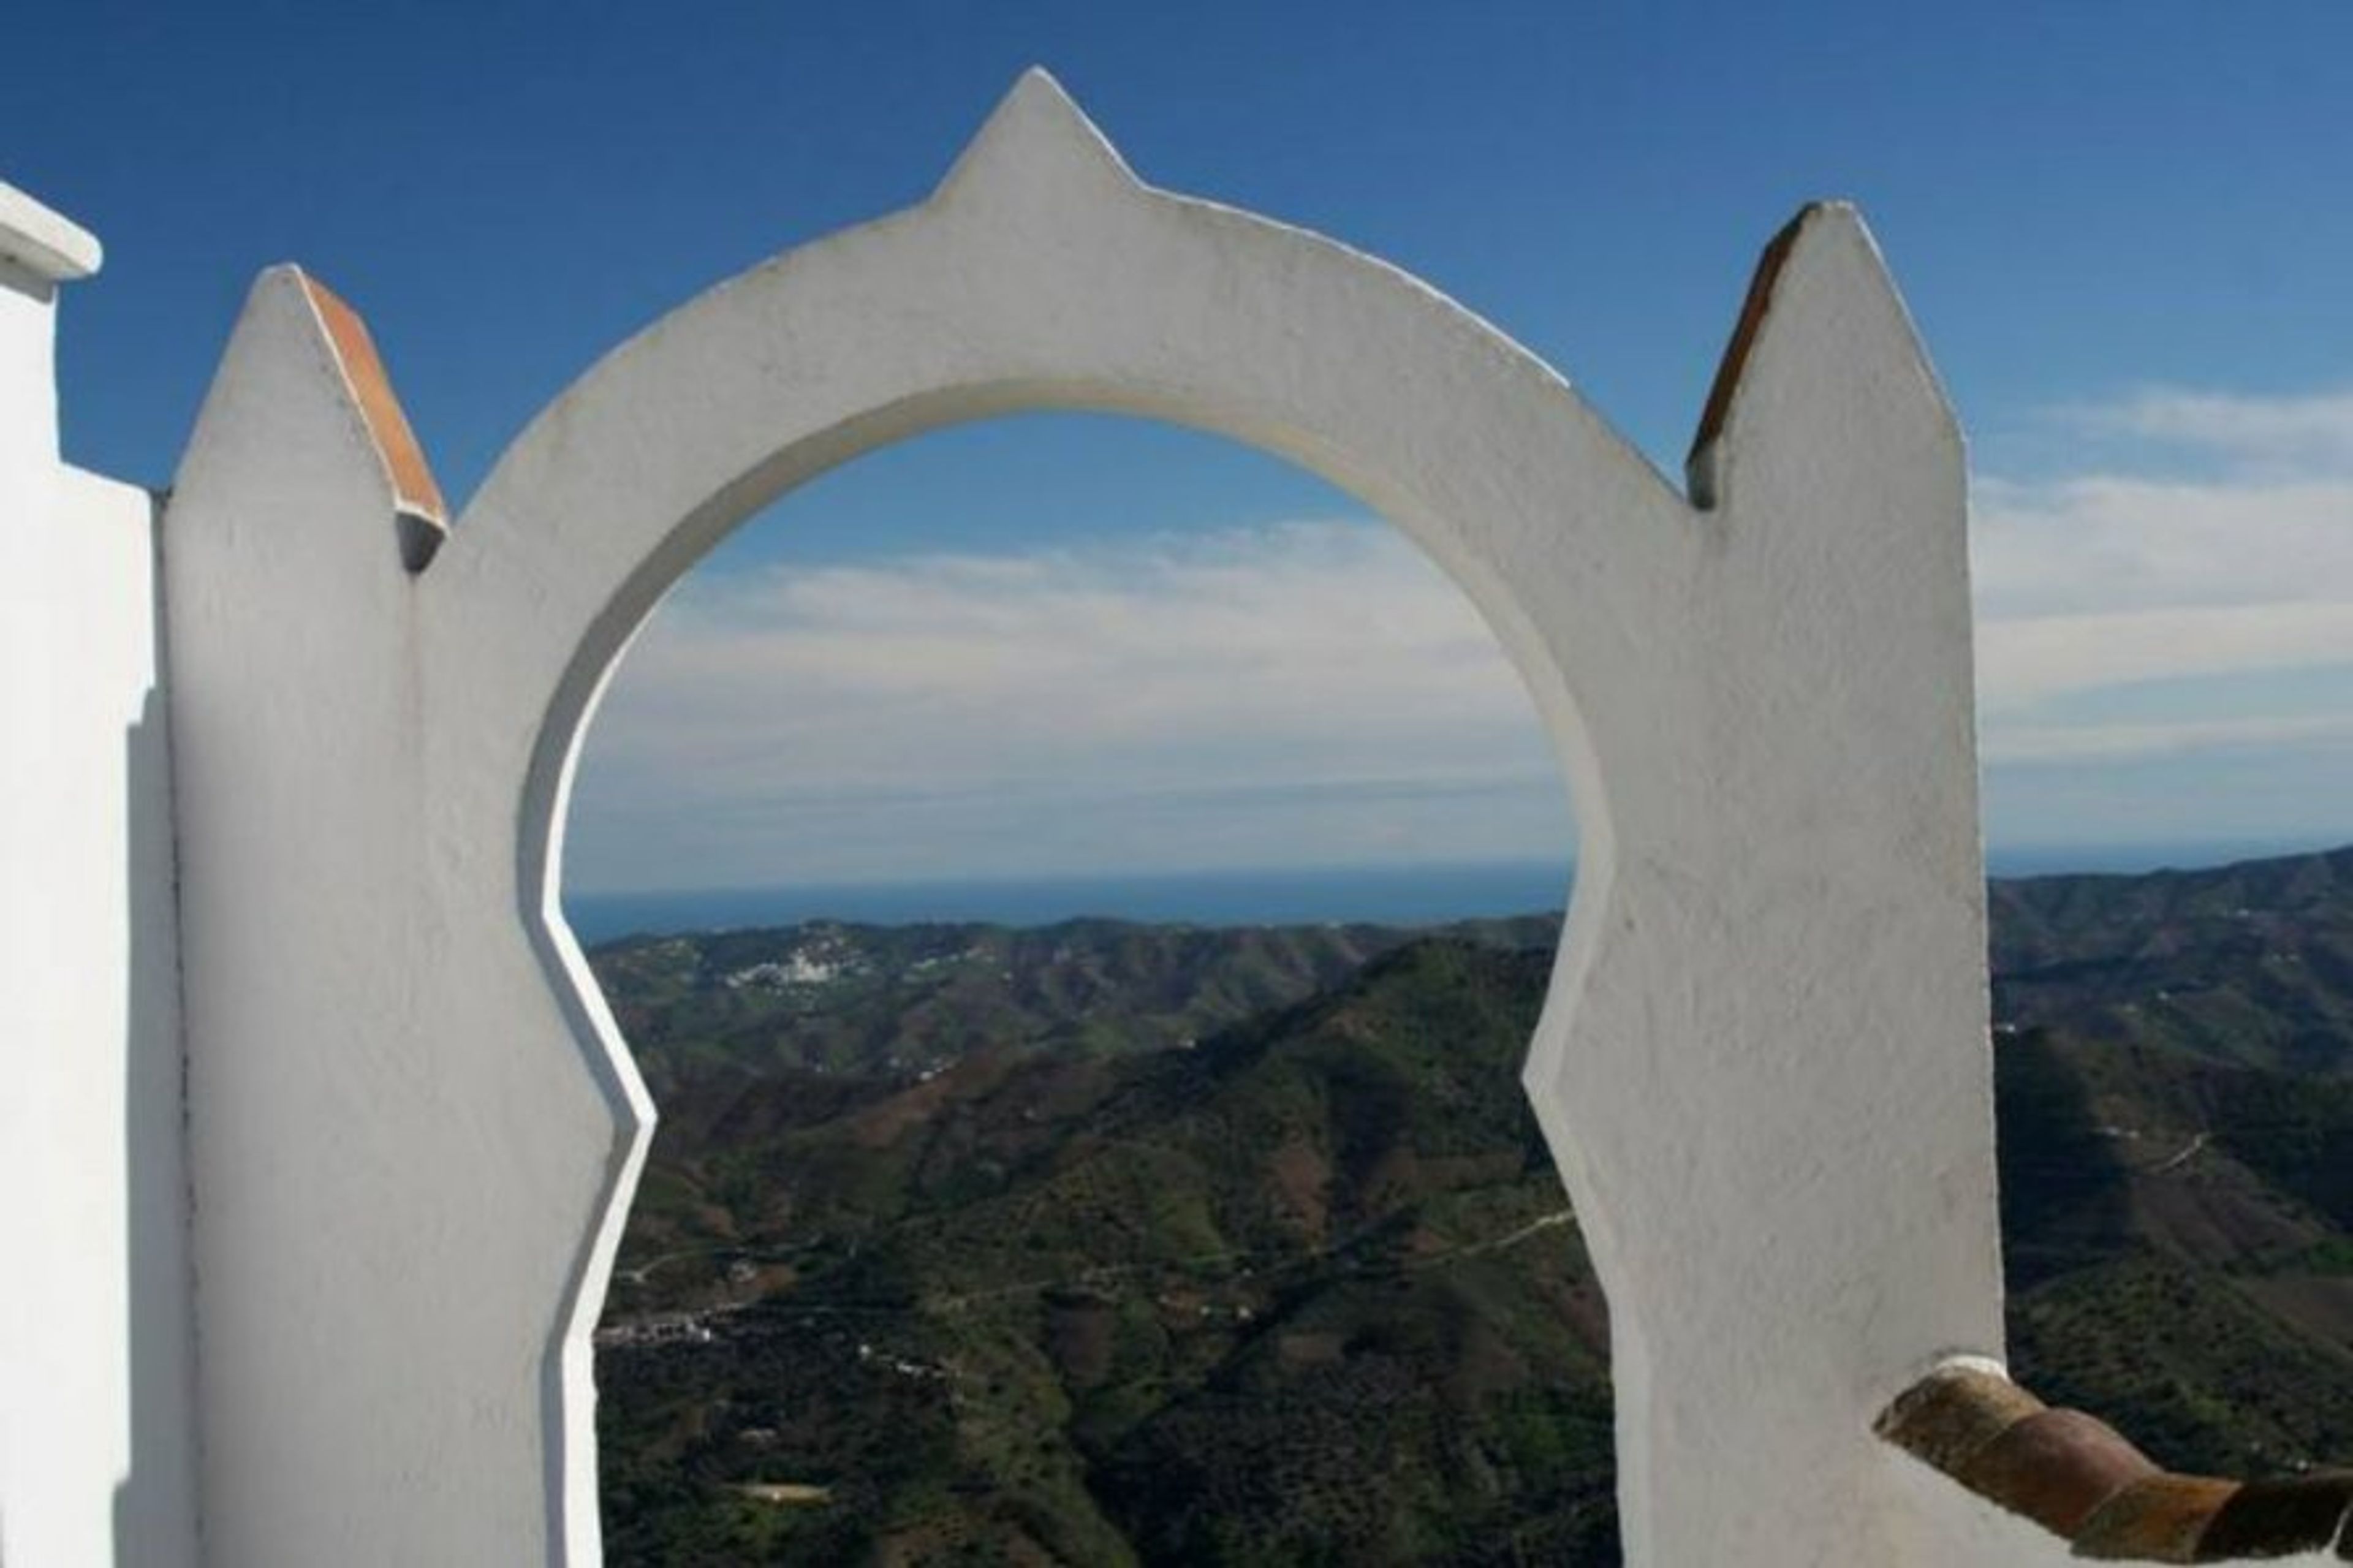 One of the many beautiful arabic arches of Comares with amazing views!